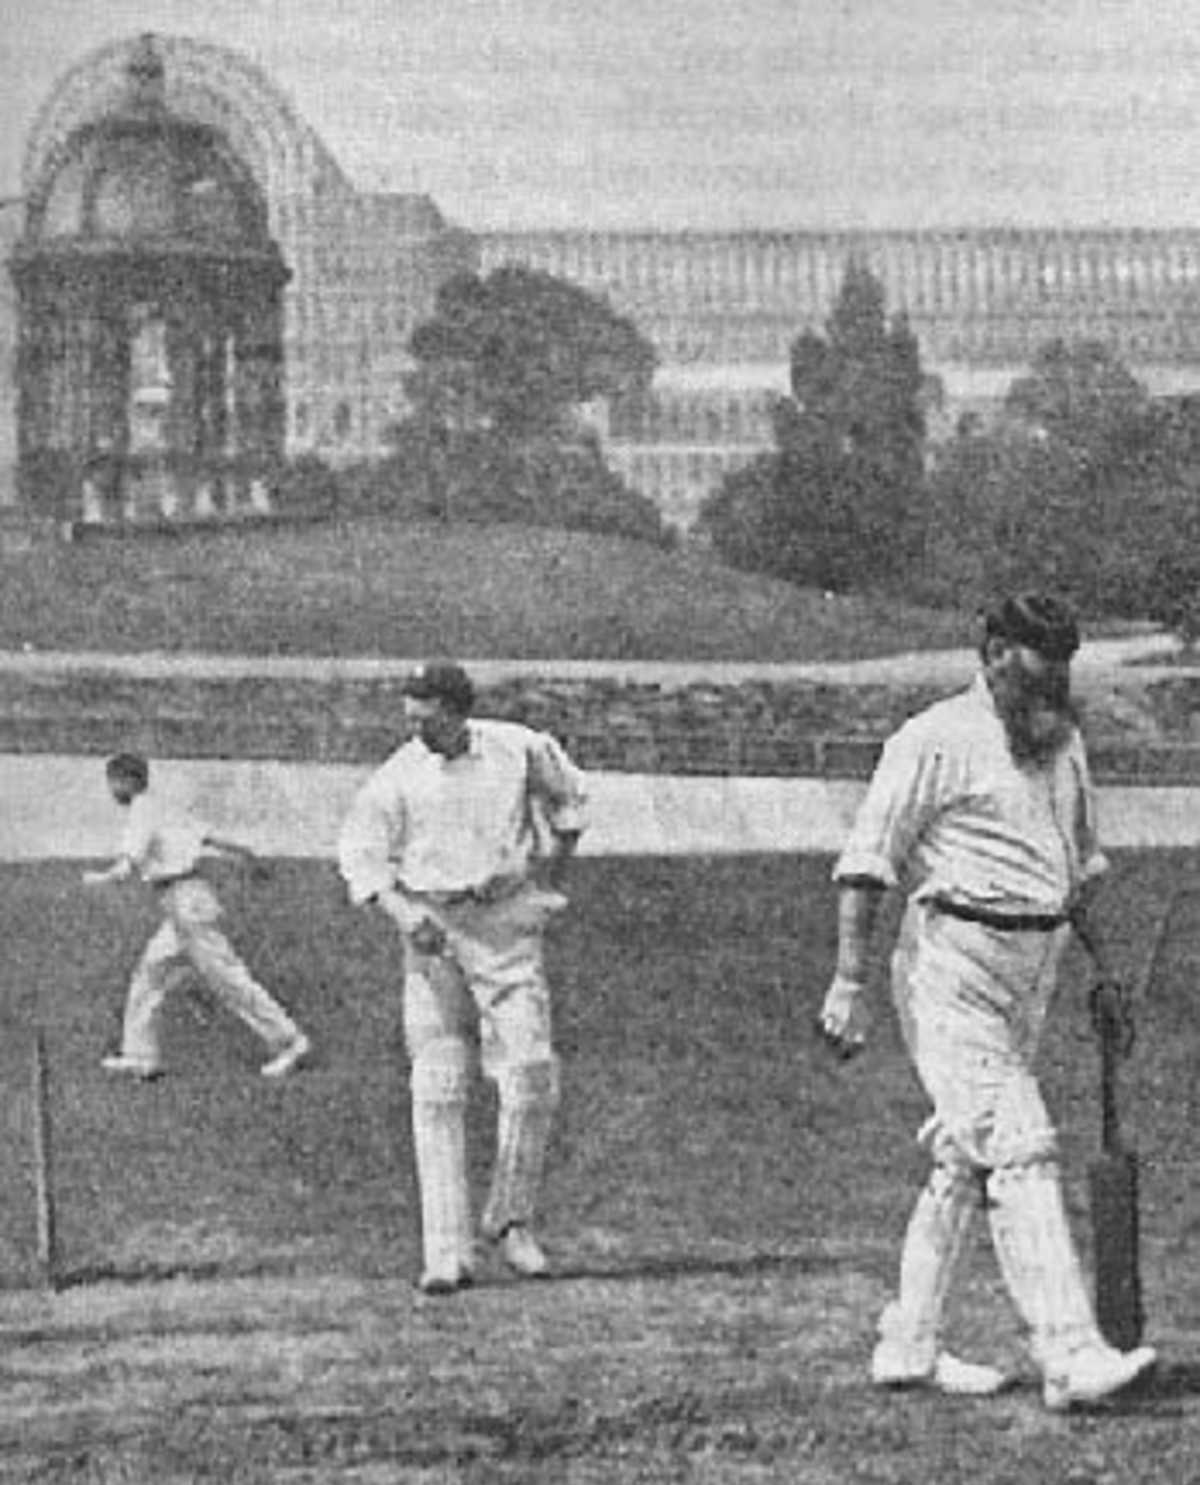 W G Grace finishes a practice session at London County's Crystal Palace ground, 1902